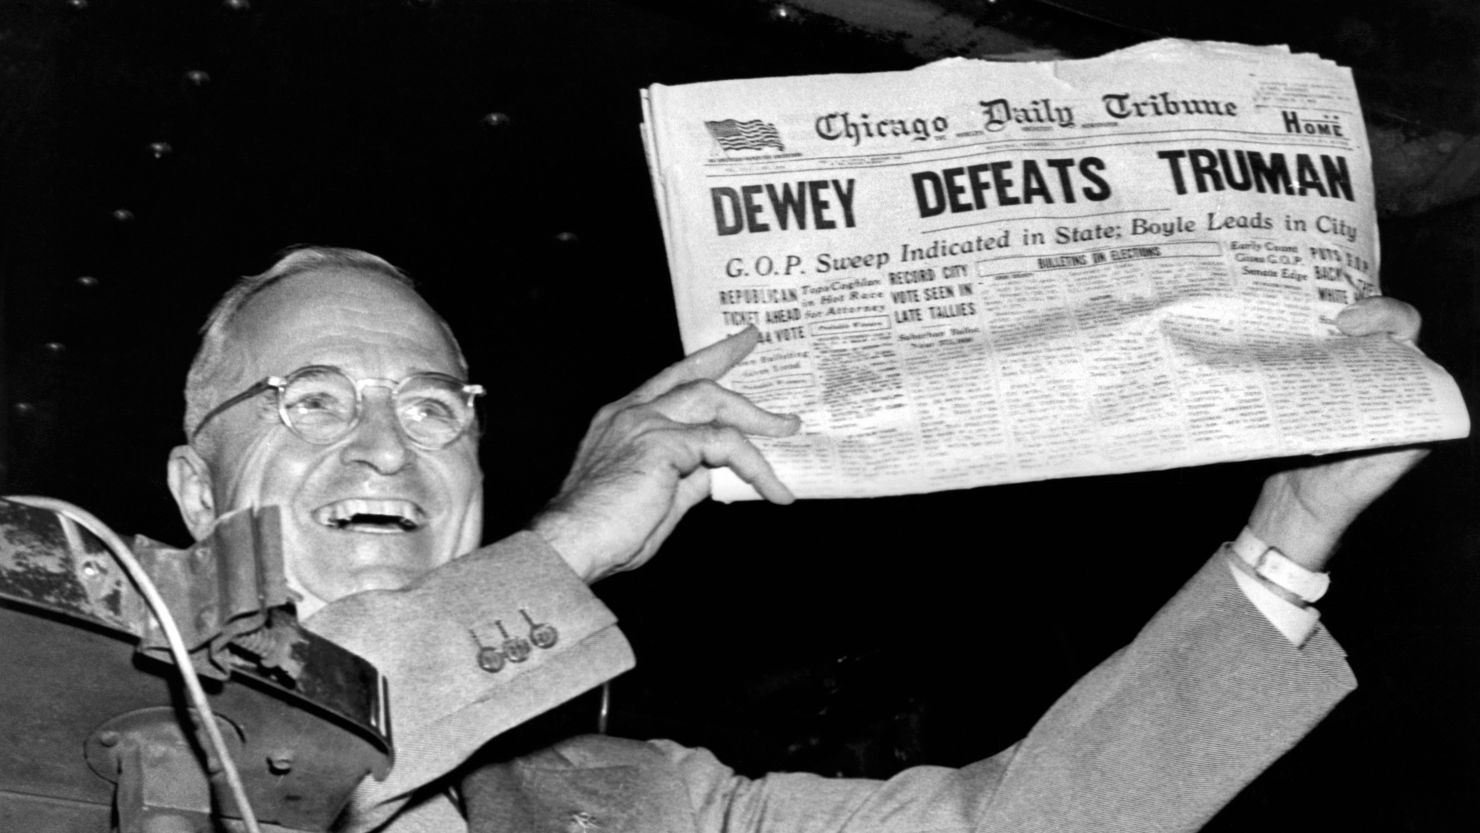 President Harry Truman holds up a copy of the Chicago Daily Tribune declaring his defeat to Thomas Dewey in the presidential election in November 1948.